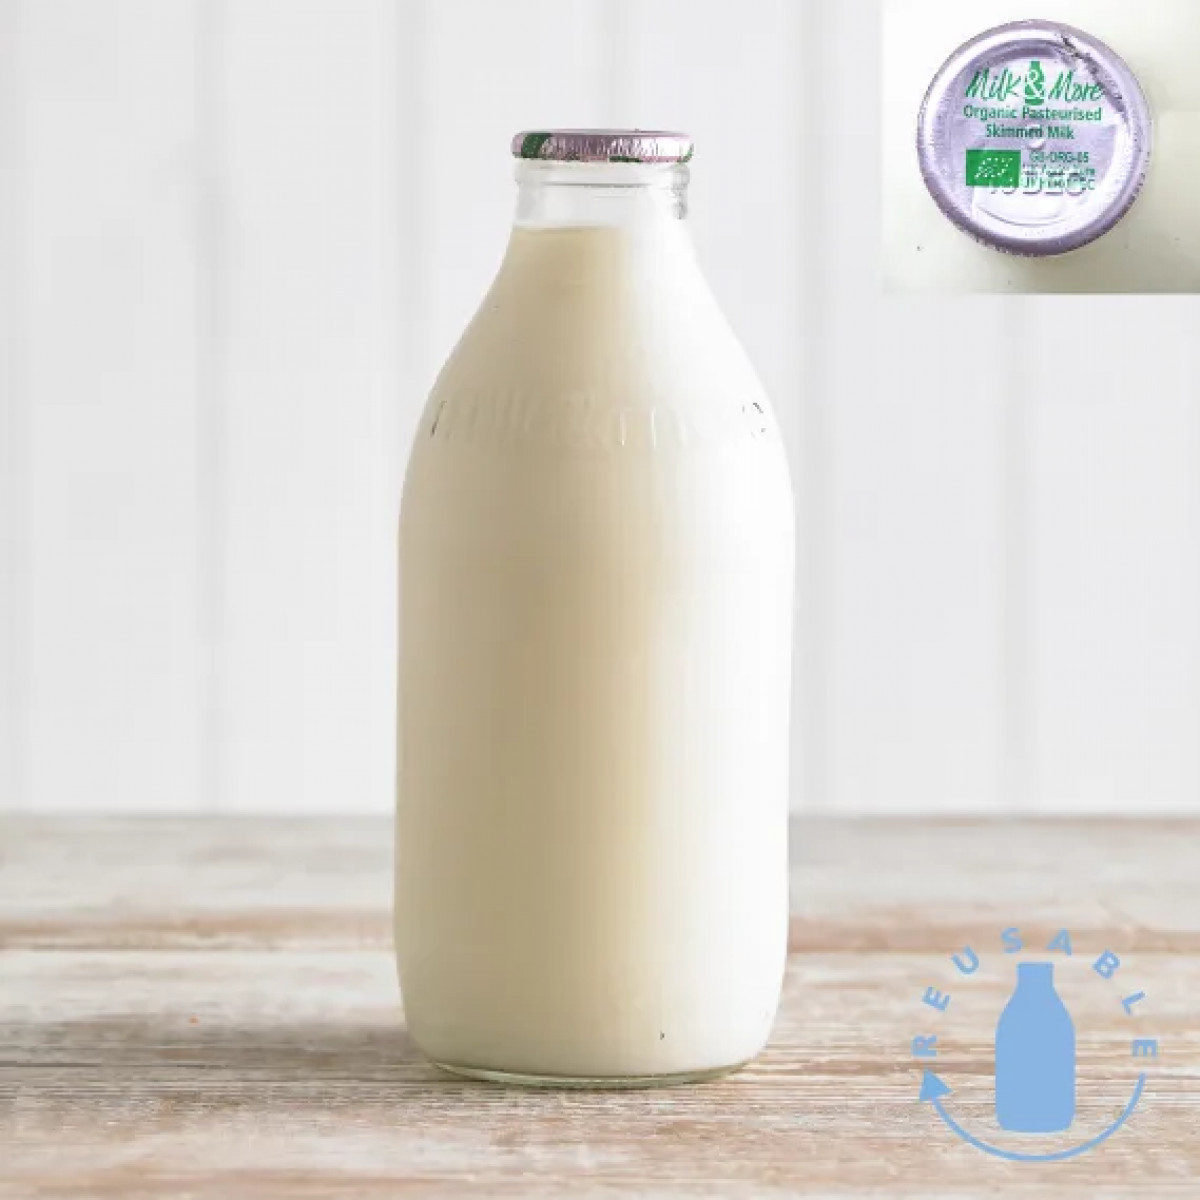 Product picture for Organic skimmed milk - glass bottle